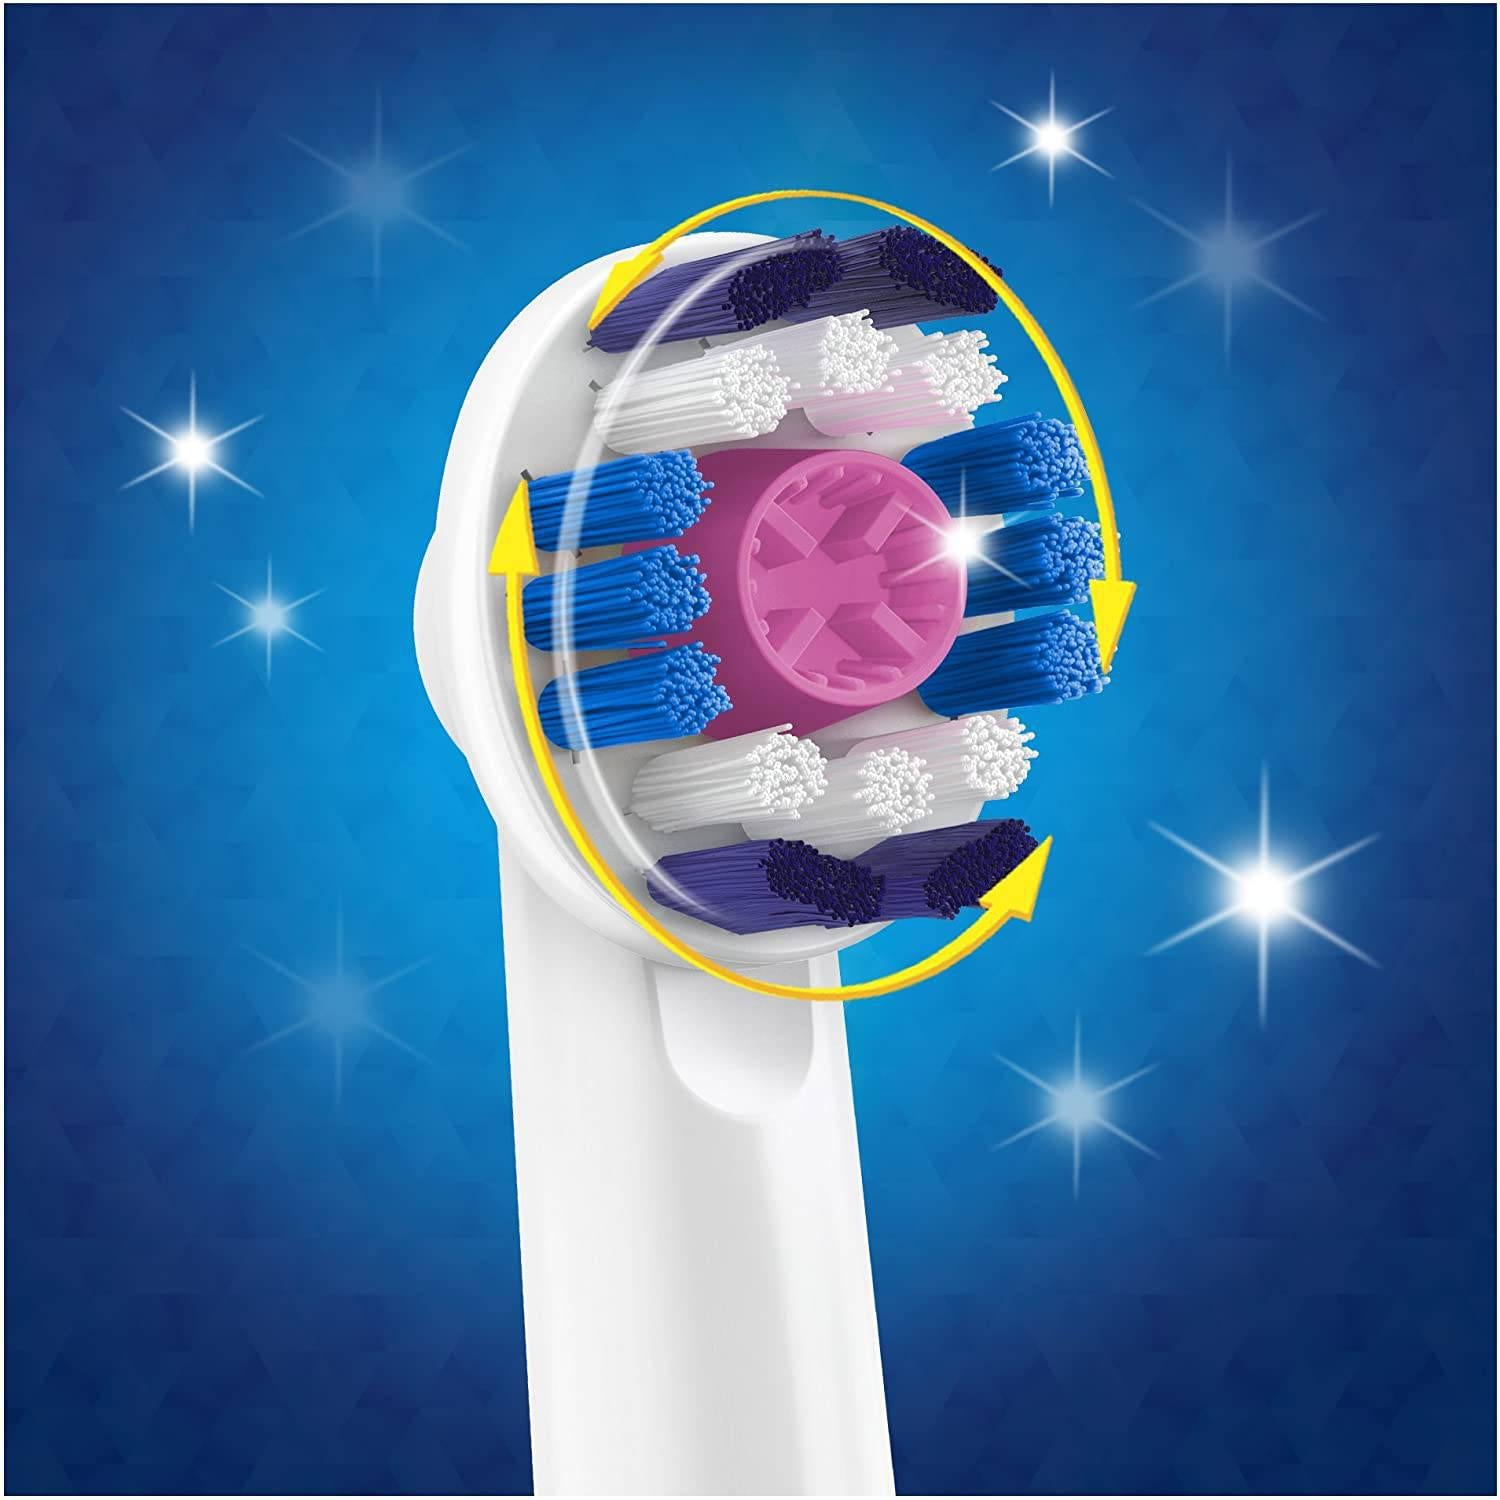 Oral-B Genuine 3D White Replacement Toothbrush Heads - Round Head - Pack of 4 - Healthxpress.ie